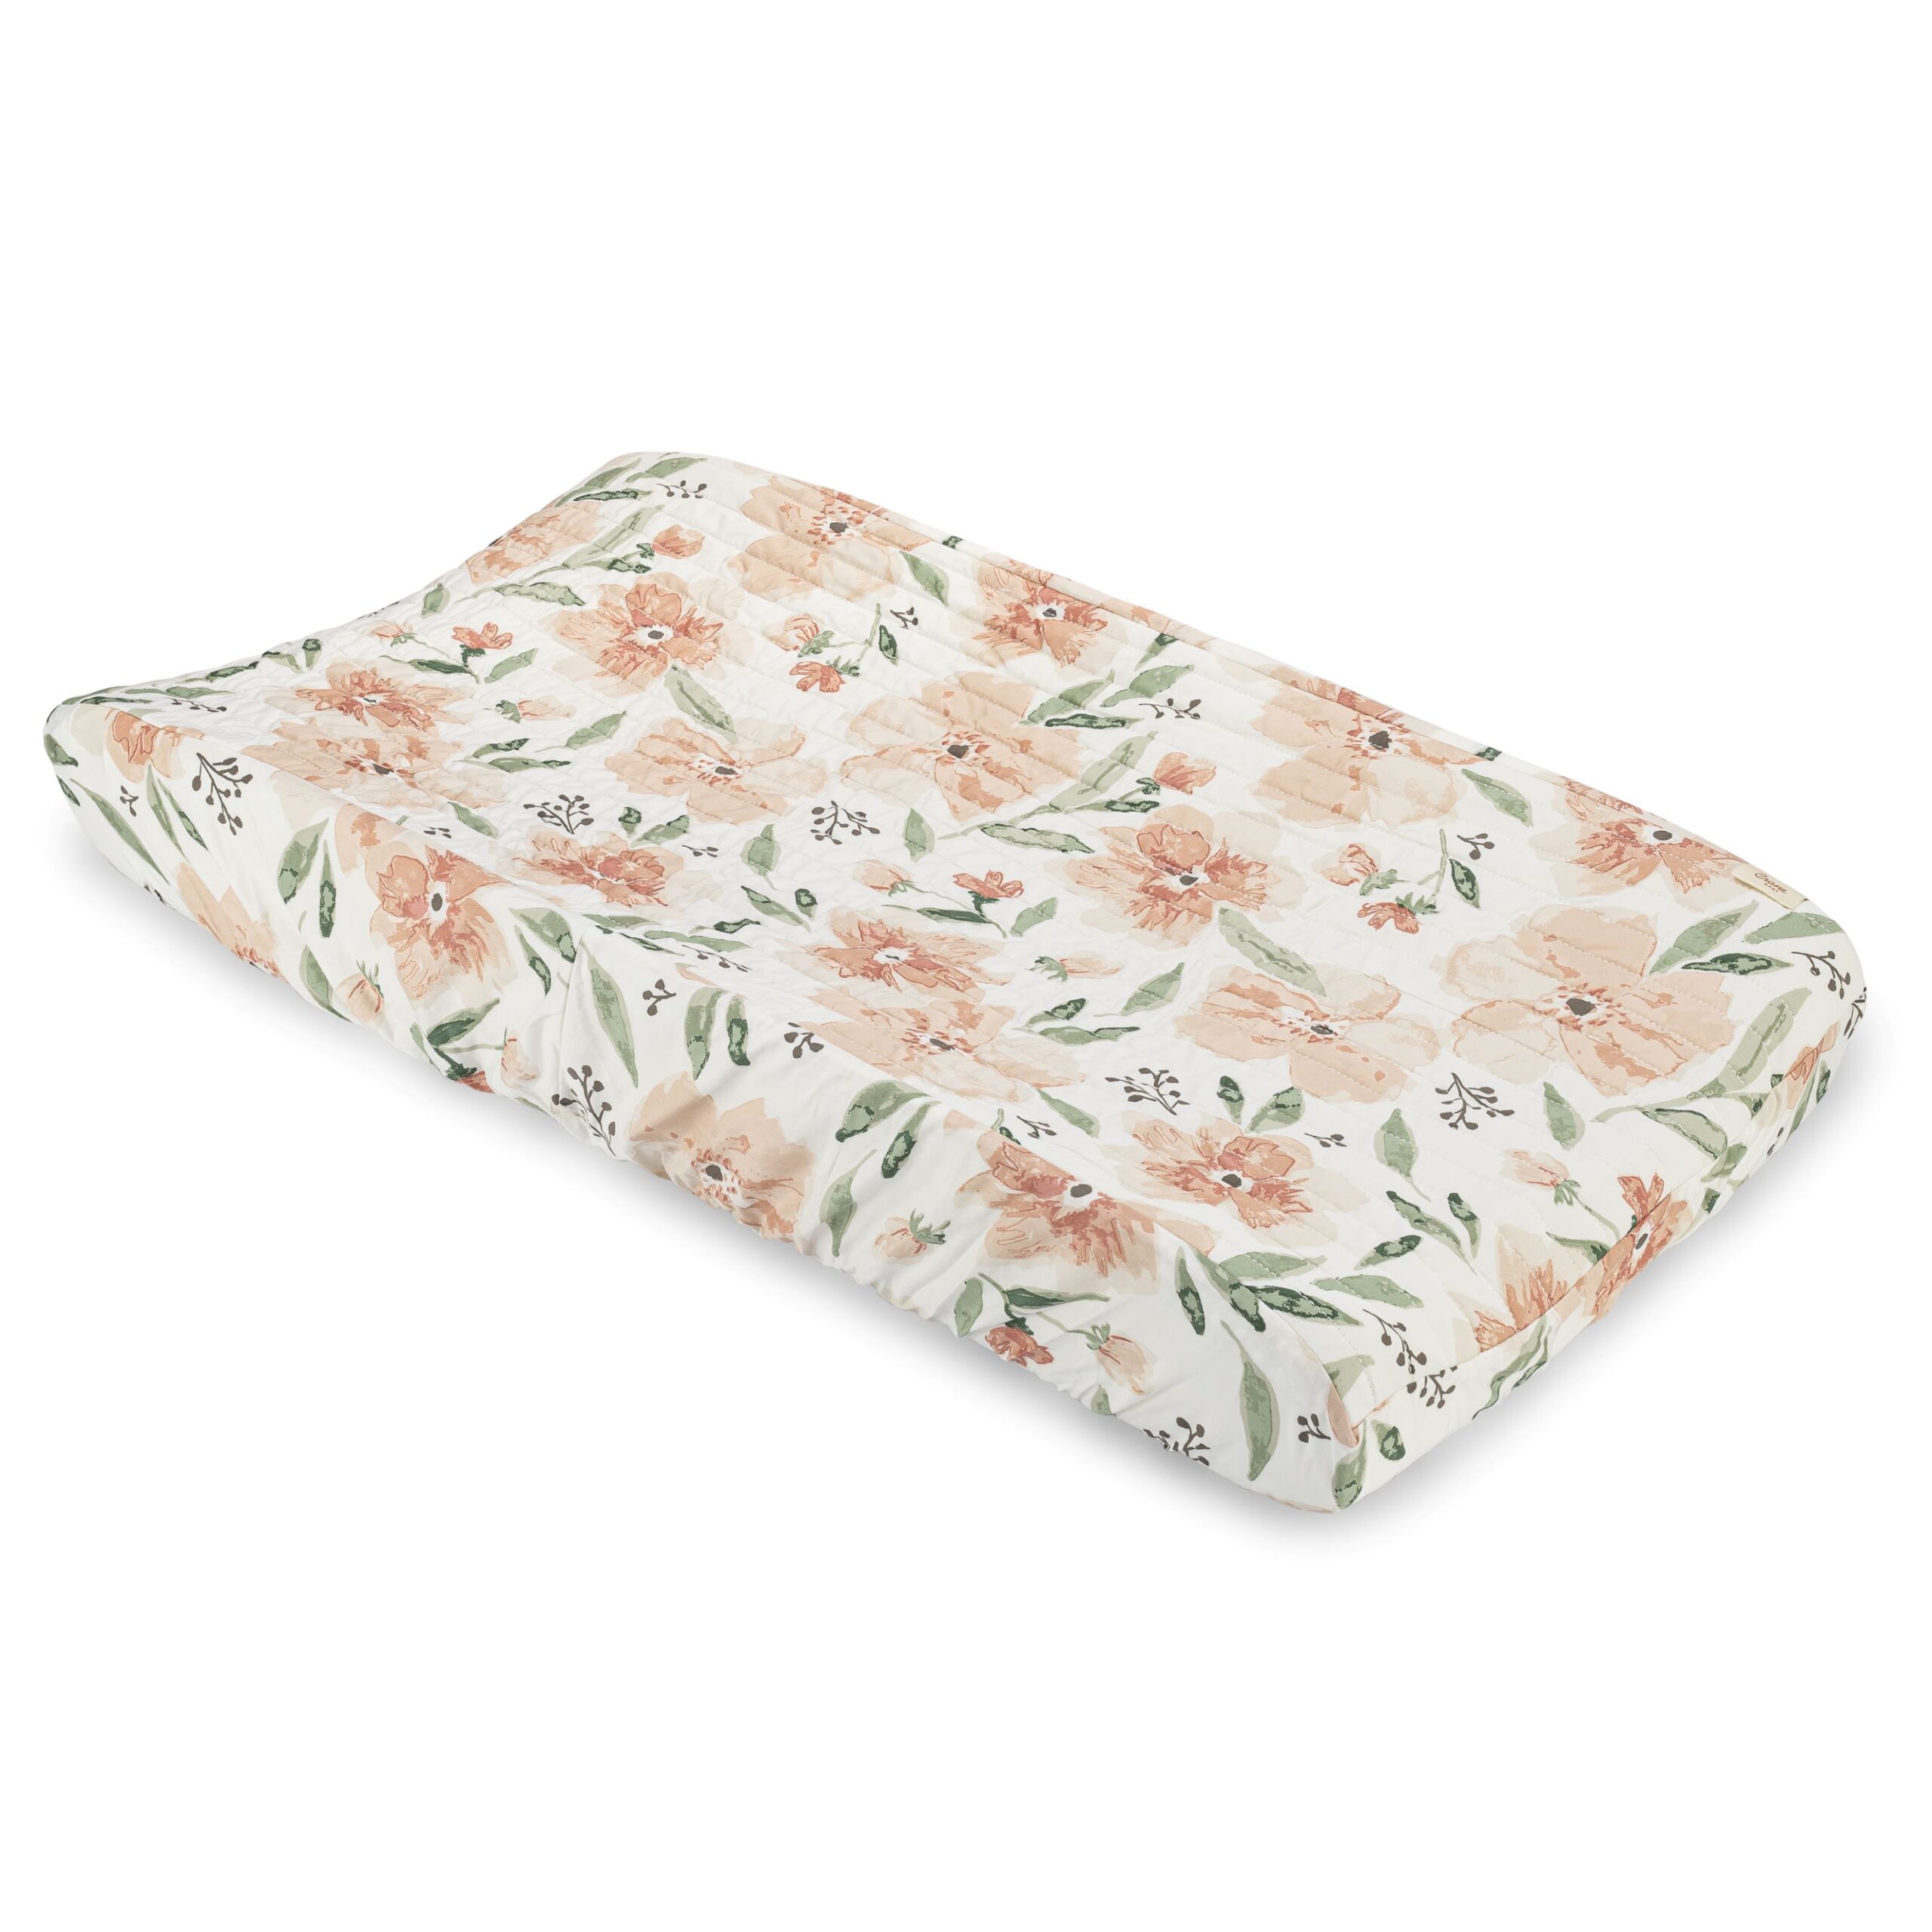 Floral change pad cover on white background